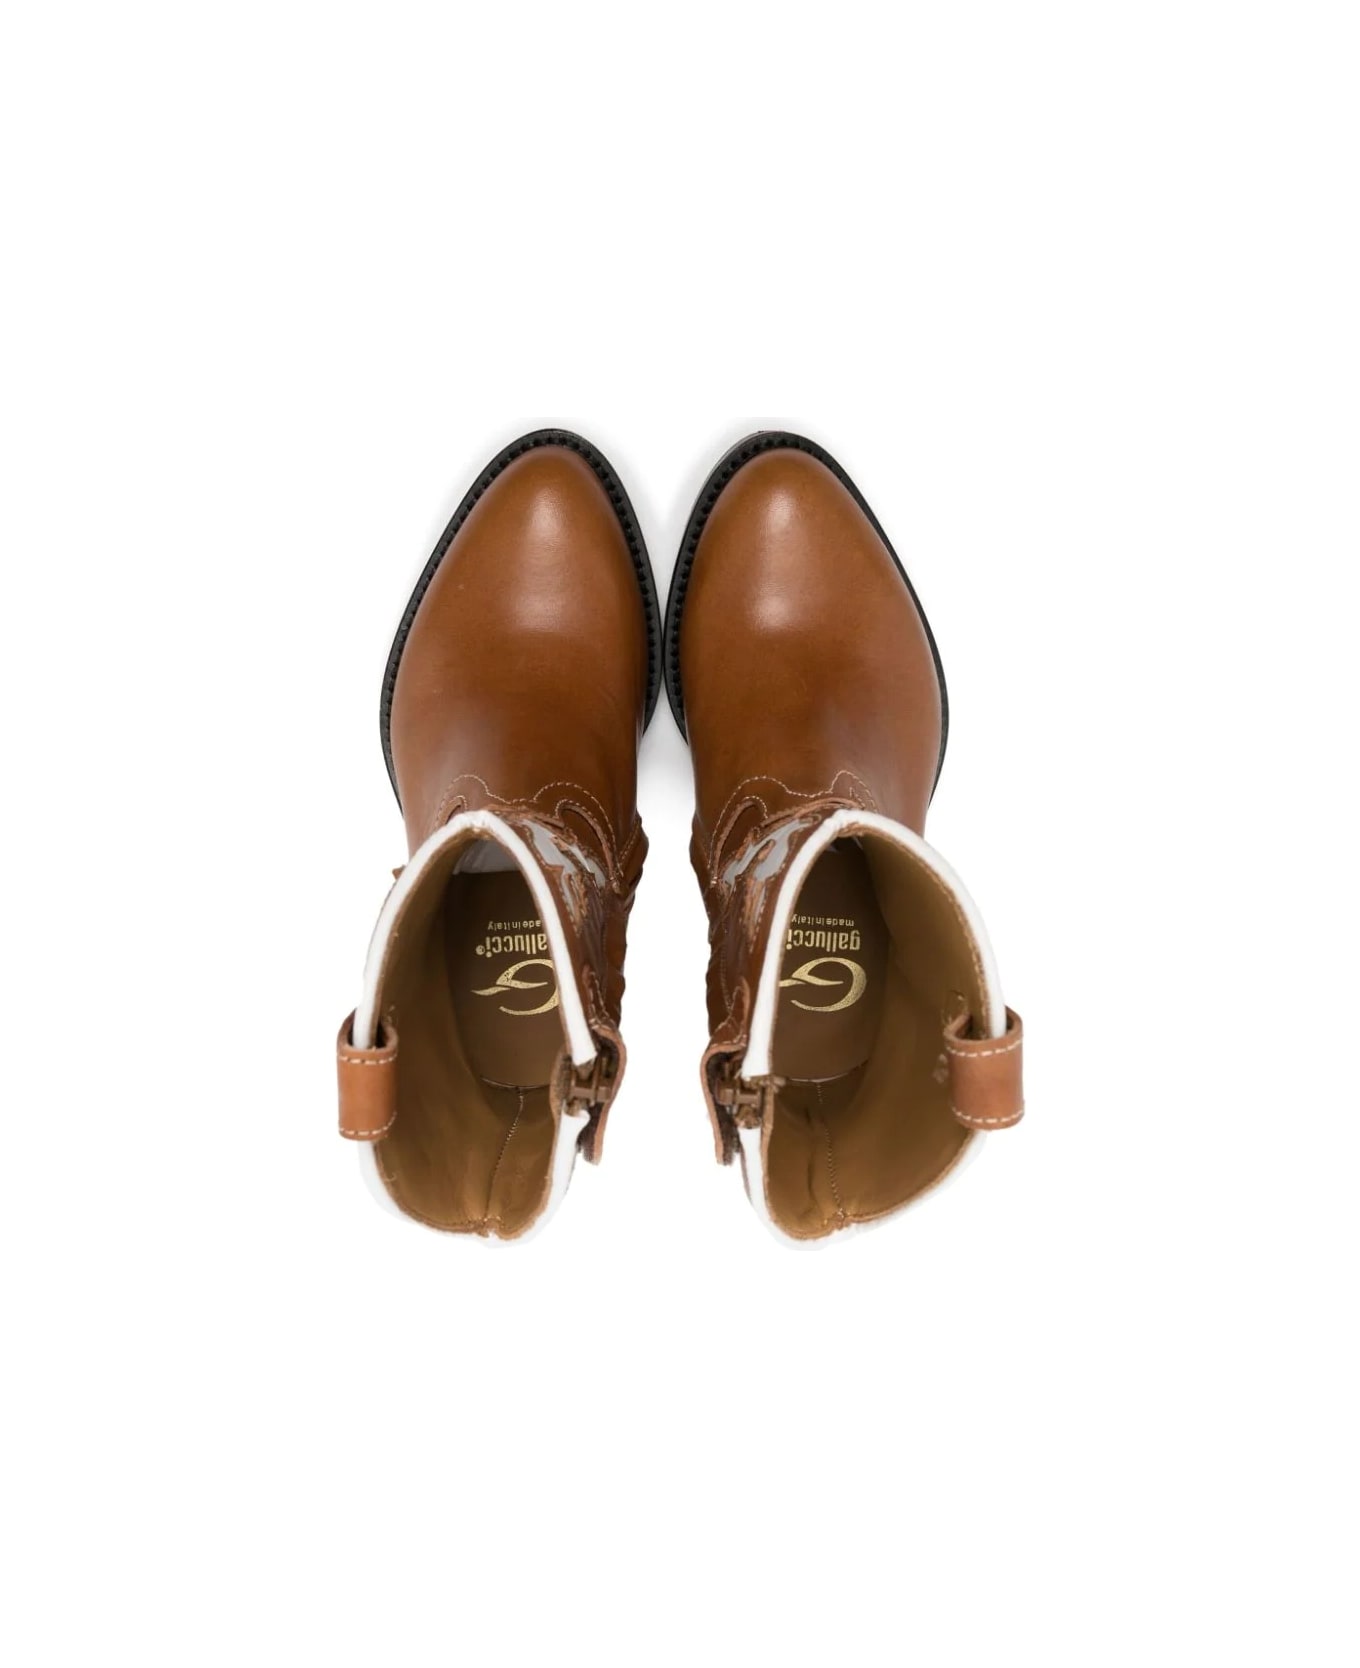 Gallucci Western Boots With Embroidery - Brown シューズ